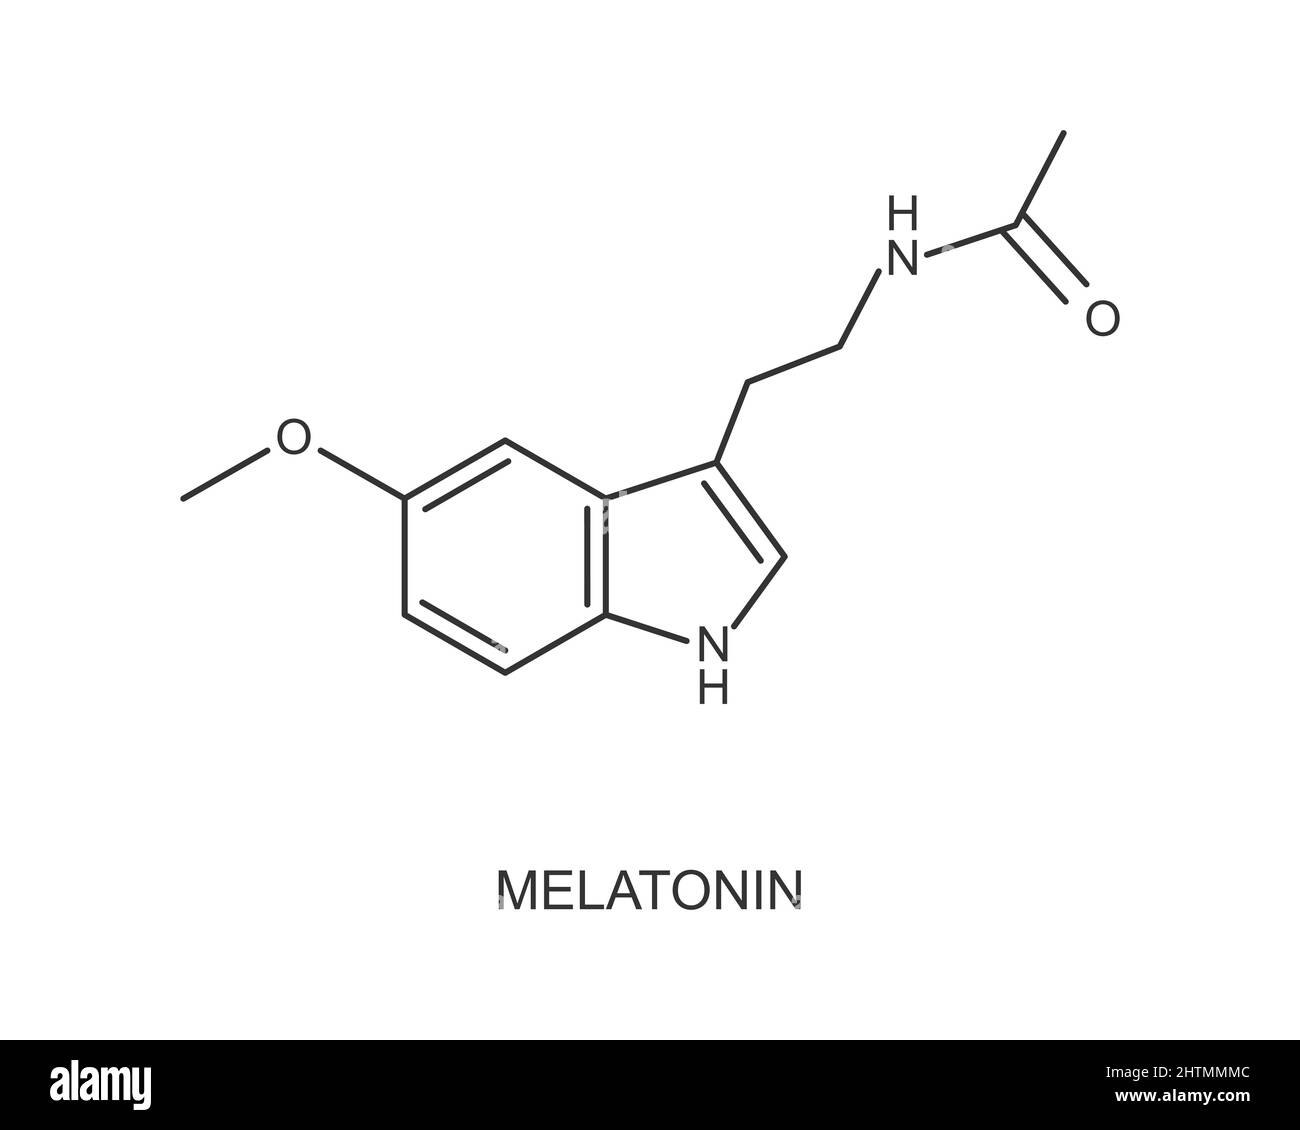 Melatonin molecular structure. Hormone used for jet lag, insomnia, circadian rhythm disorder therapy. Sleep and wake cycle regulation icon isolated on white background. Vector graphic illustration Stock Vector